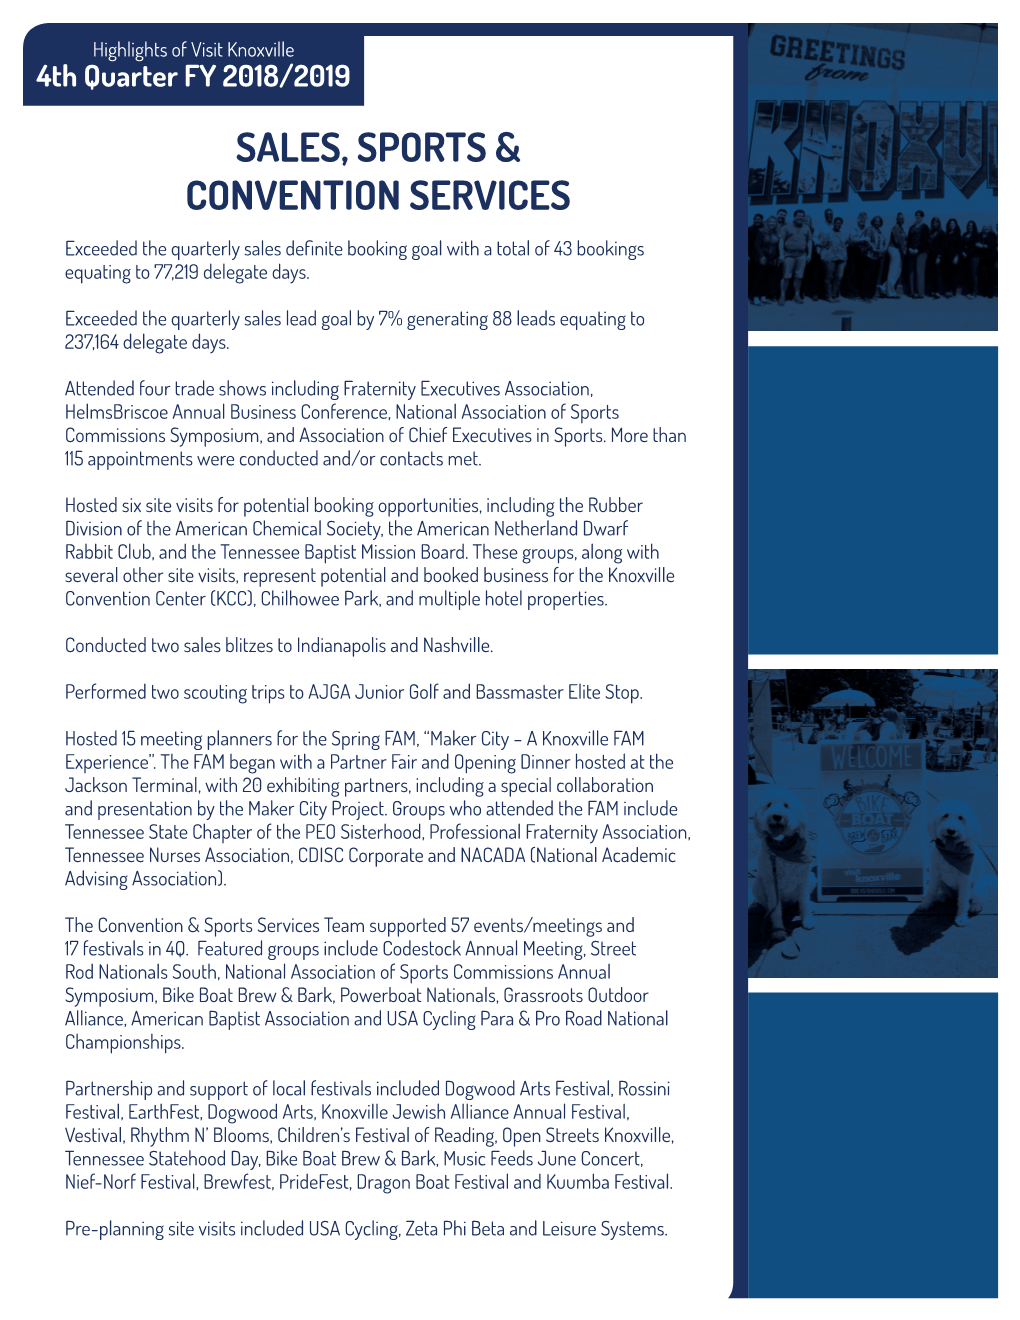 Sales, Sports & Convention Services